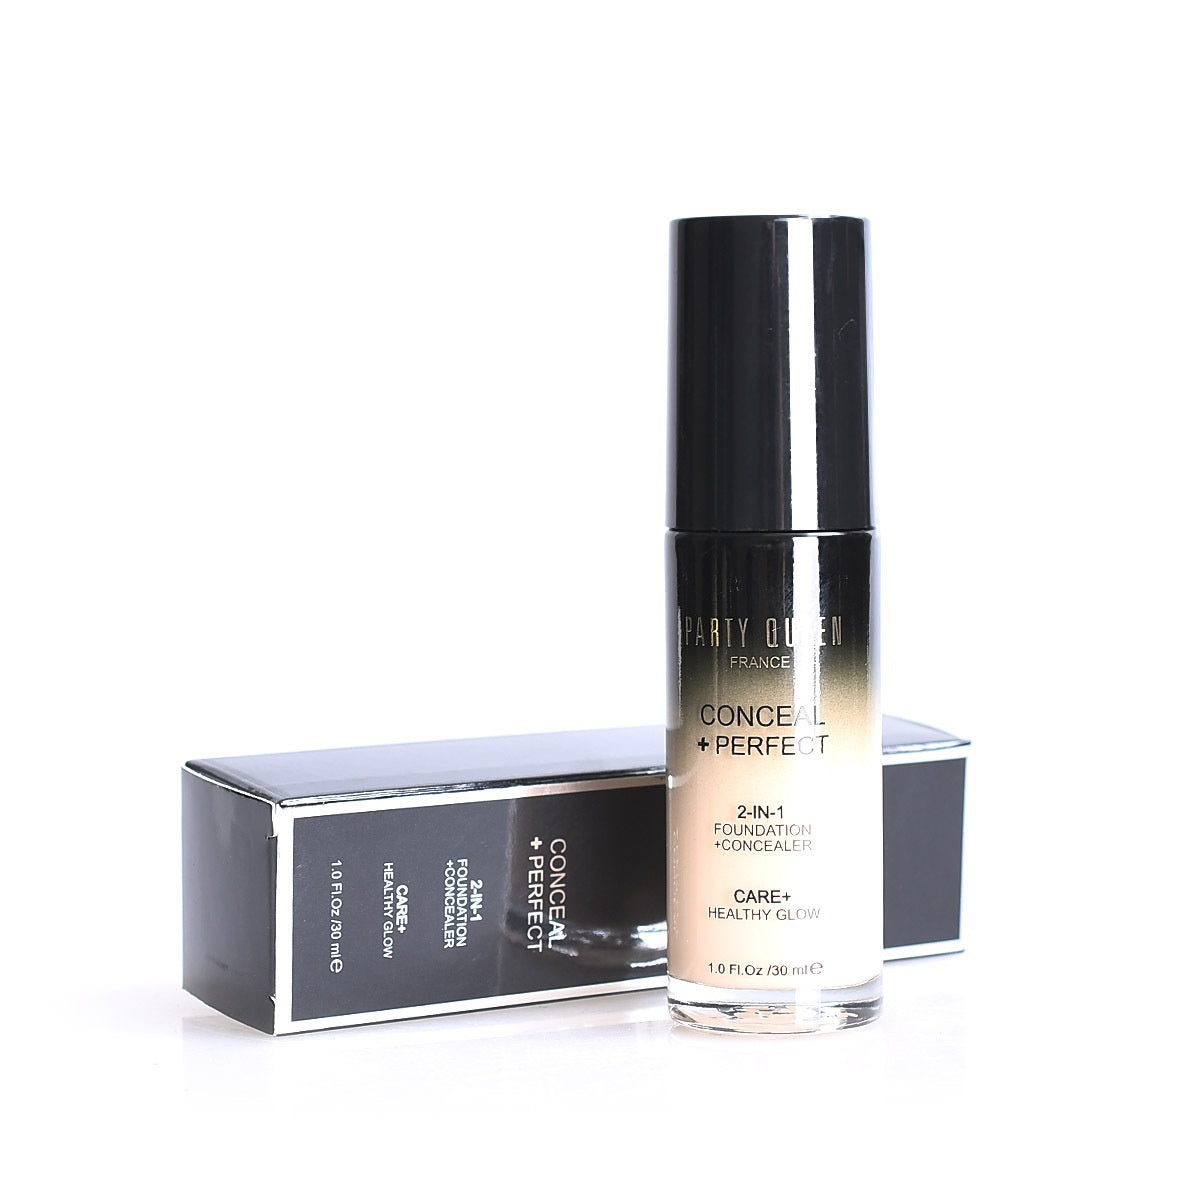 sales package of glow liquid foundation